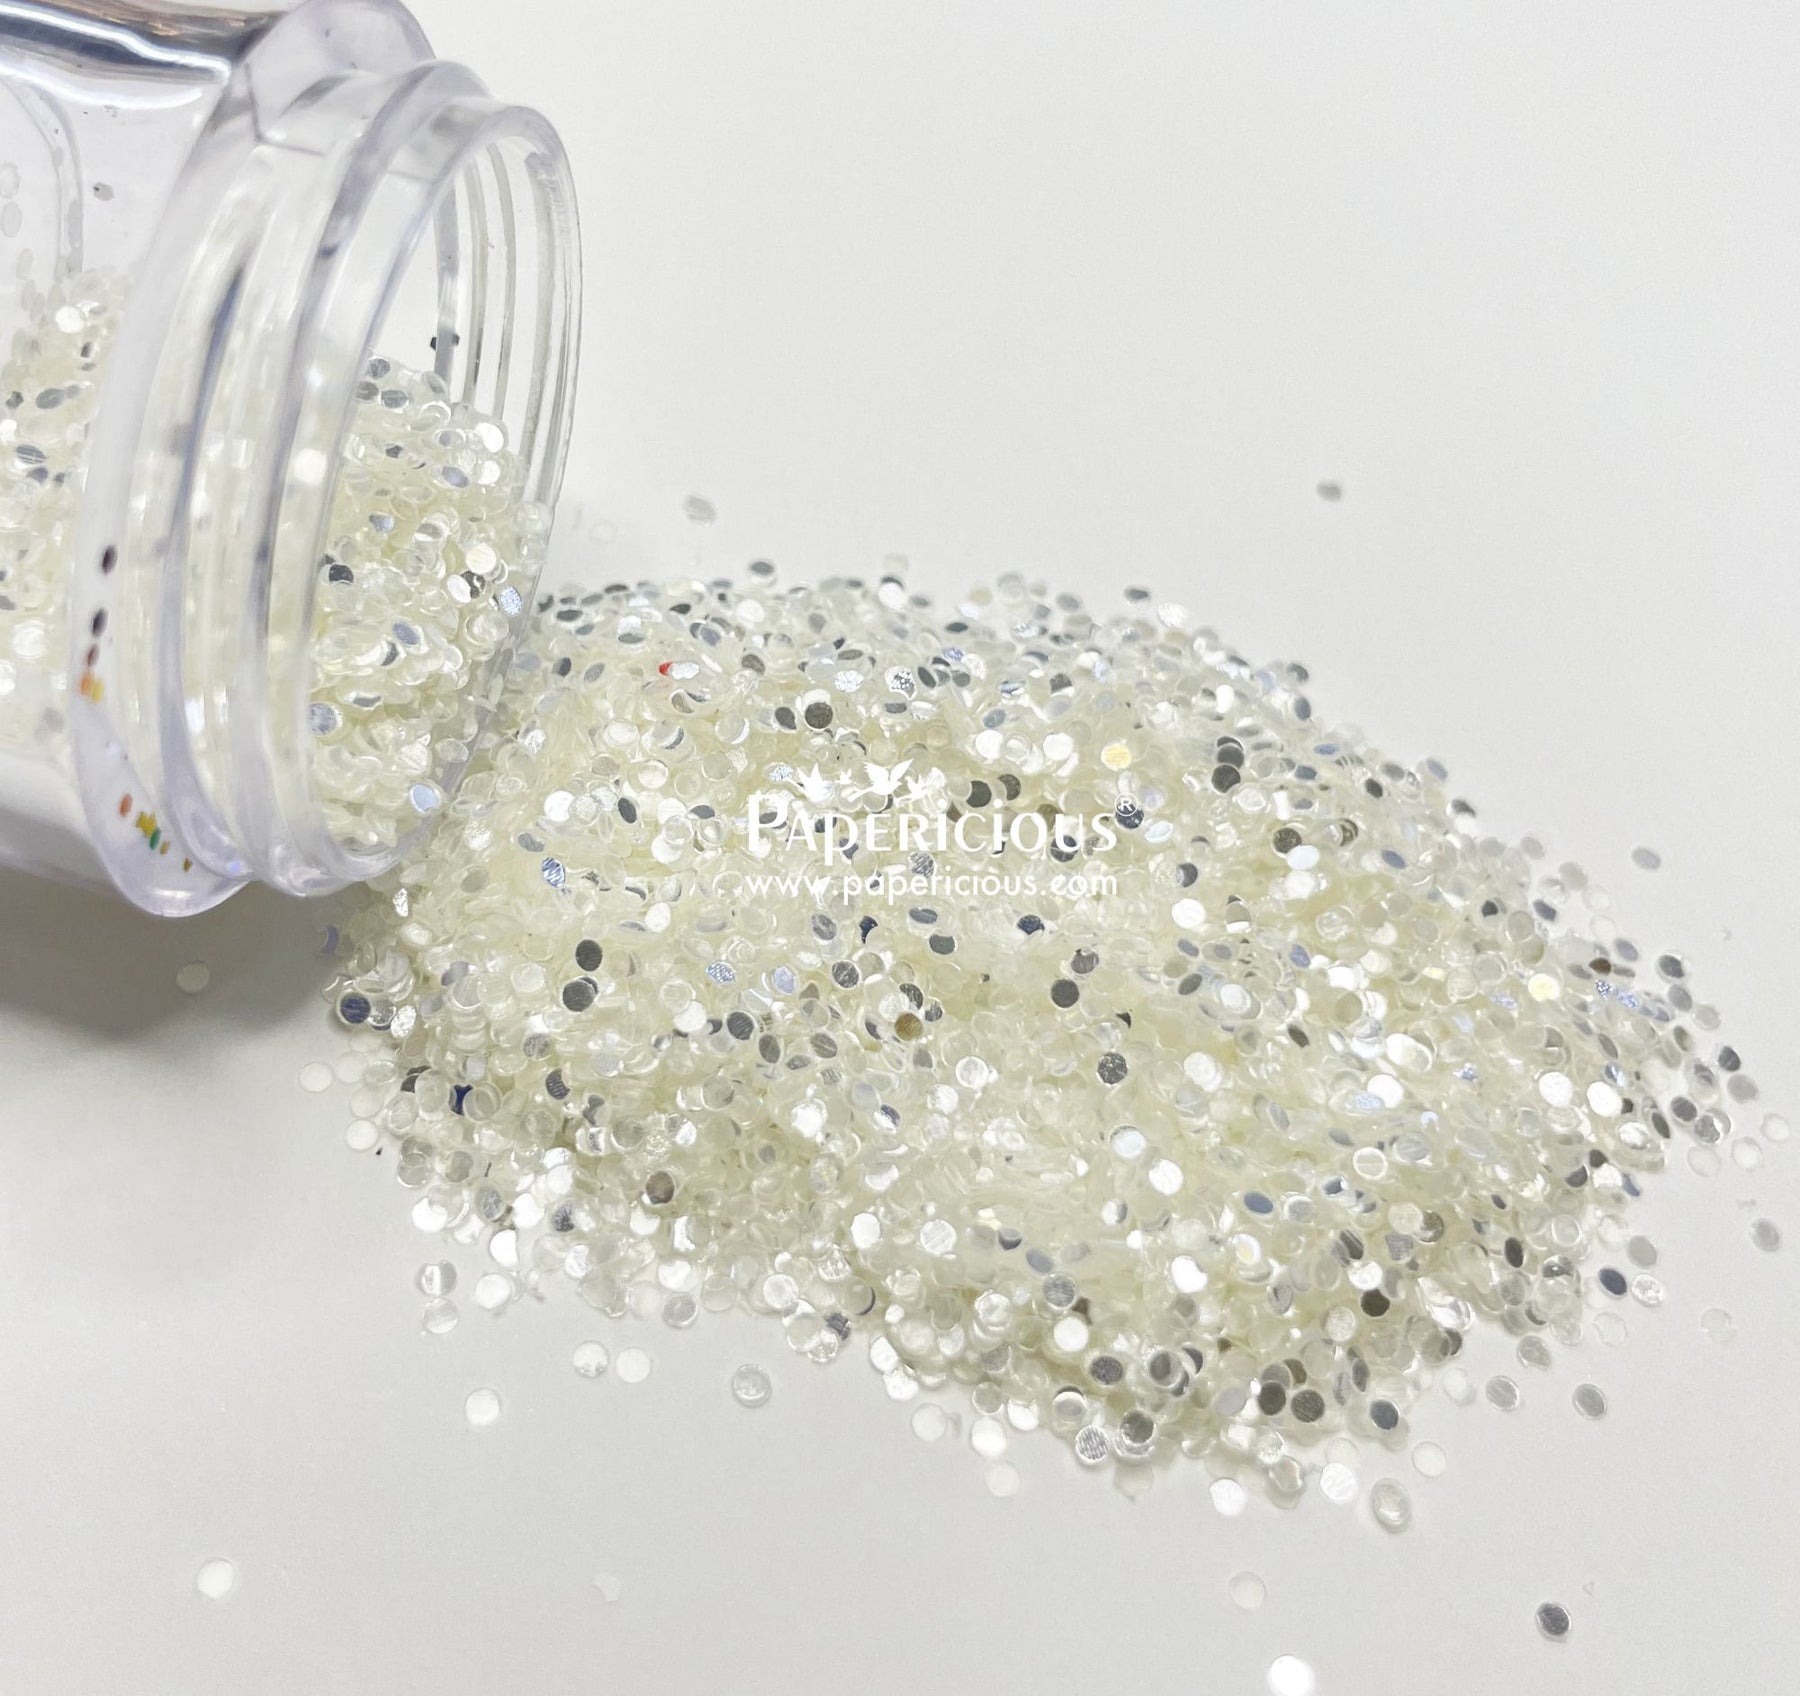 PAPERICIOUS - Clear Angel - Chunky Glitters- 13 gm